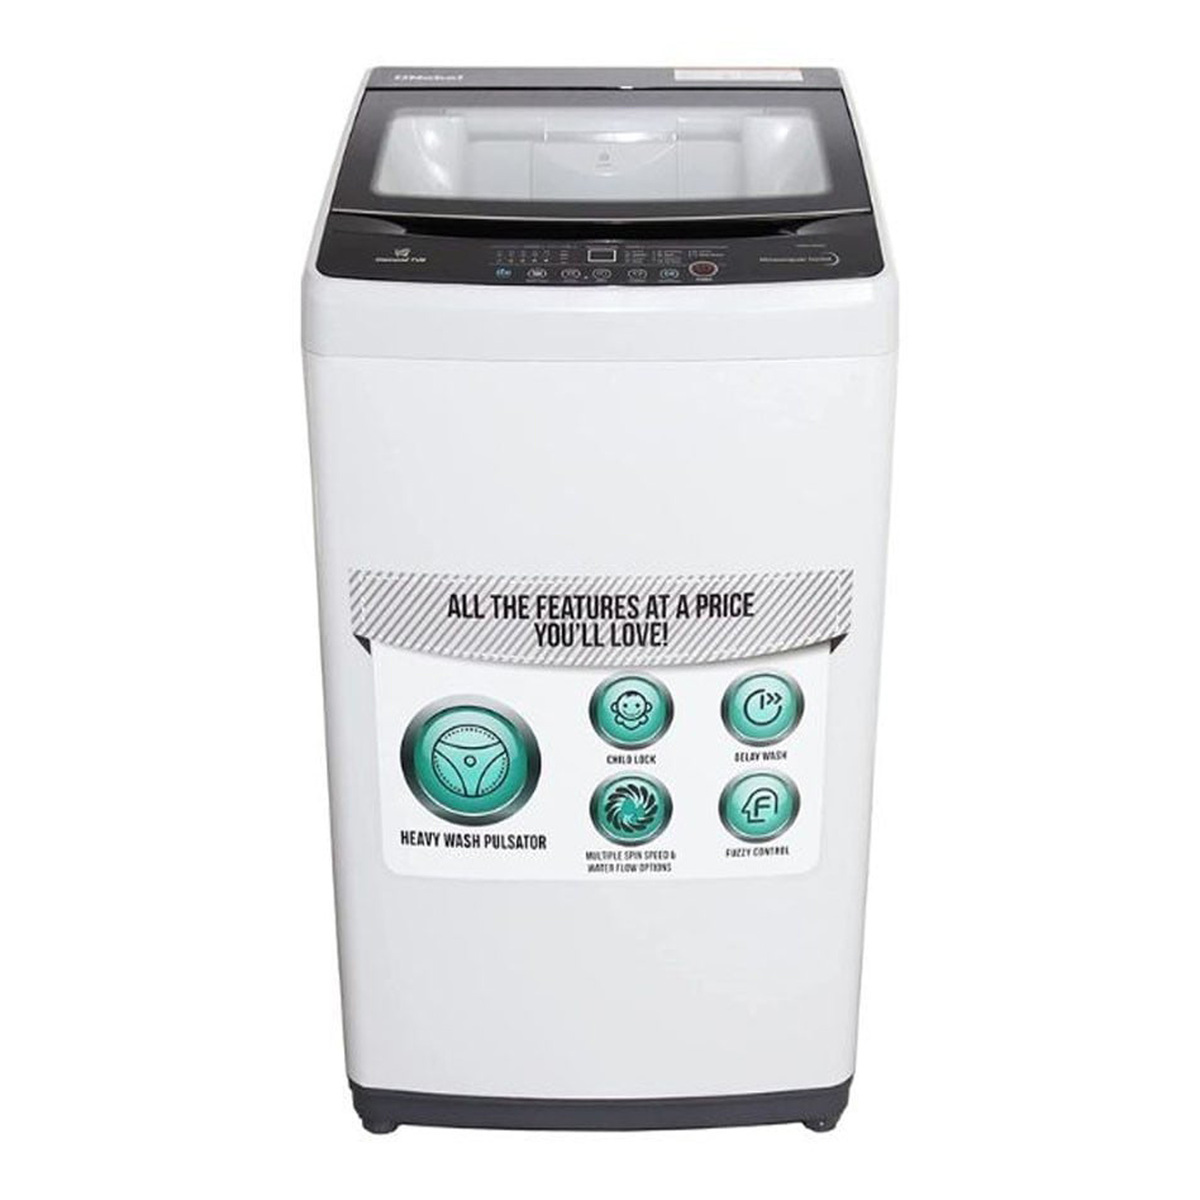 XTREME MINI WASHING MACHINE DRYER COMBO SEMI AUTOMATIC PORTABLE LAUNDRY  CLOTHES WASHER FOR BABY CLOTHES ENERGY SAVING FOR EASY QUICK WASH 4.5 KG  CAPACITY price in UAE,  UAE